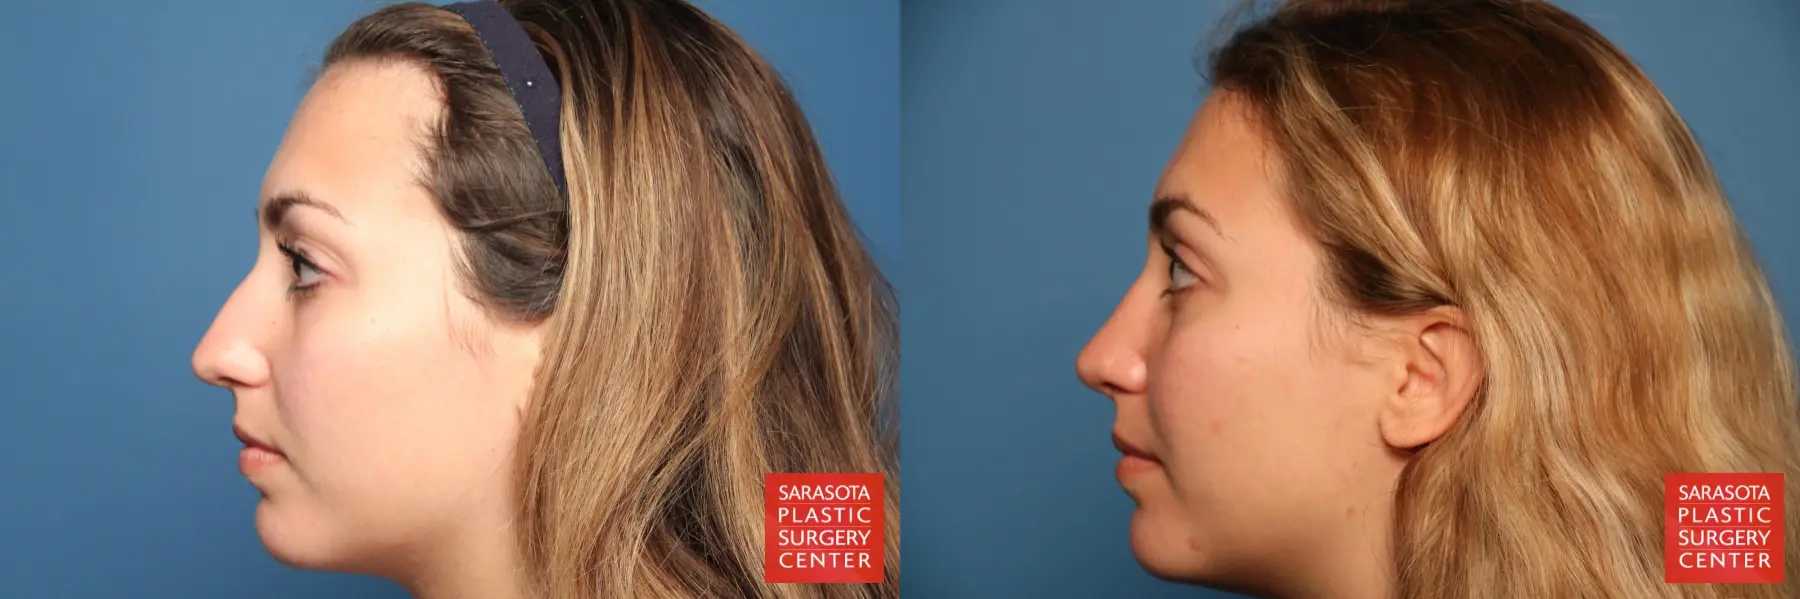 Rhinoplasty: Patient 2 - Before and After 3